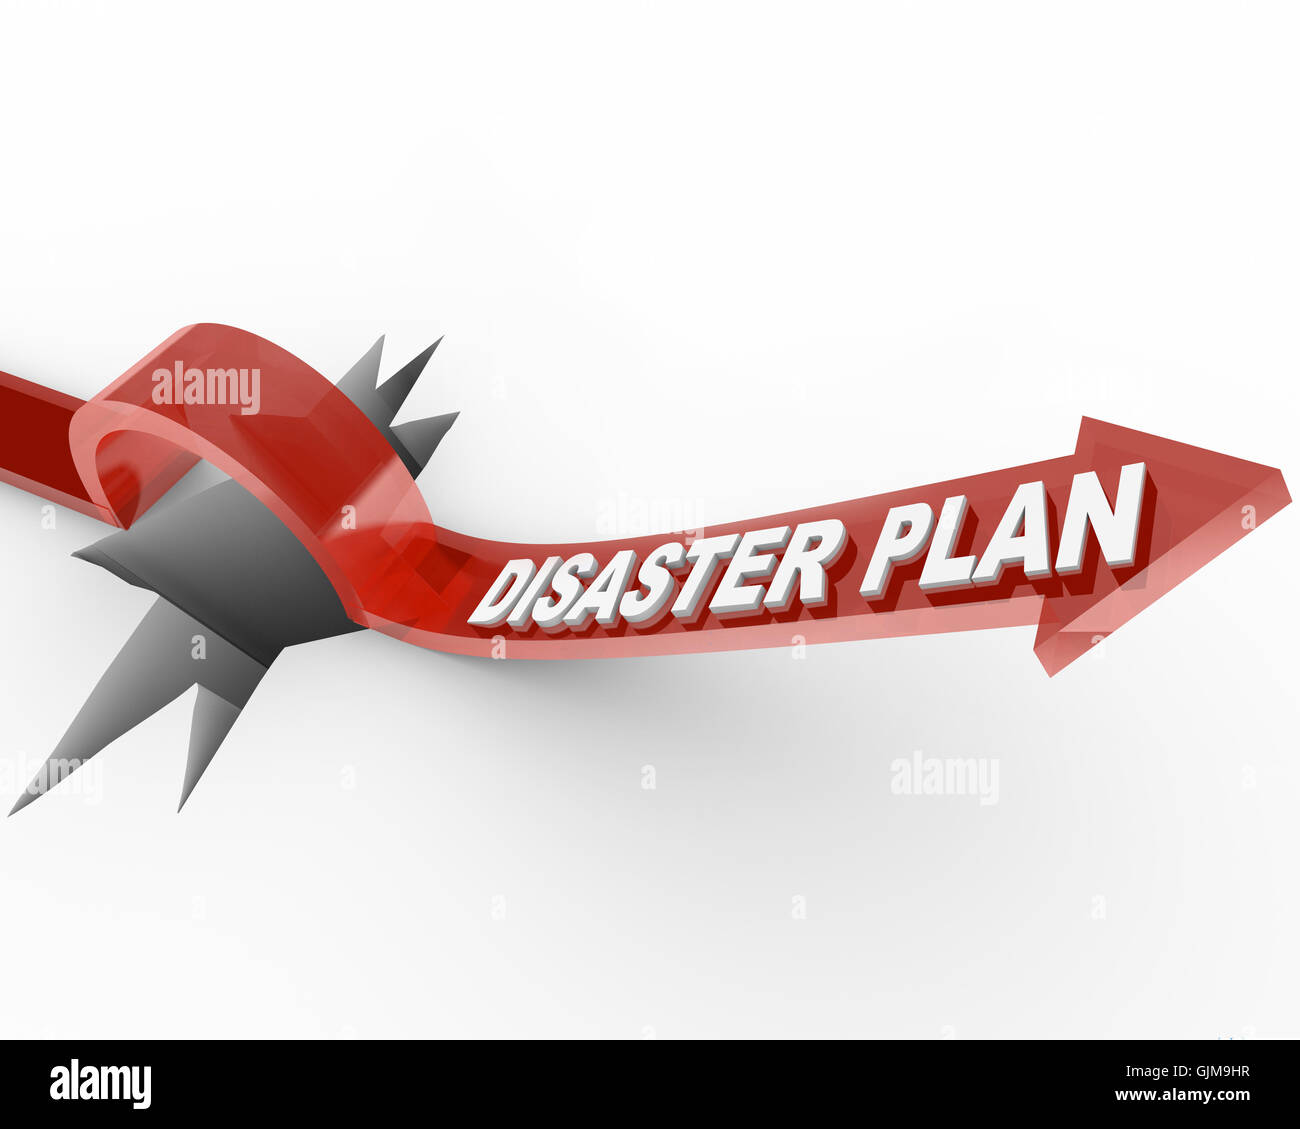 Disaster Plan - Arrow Jumping Over Hole Stock Photo